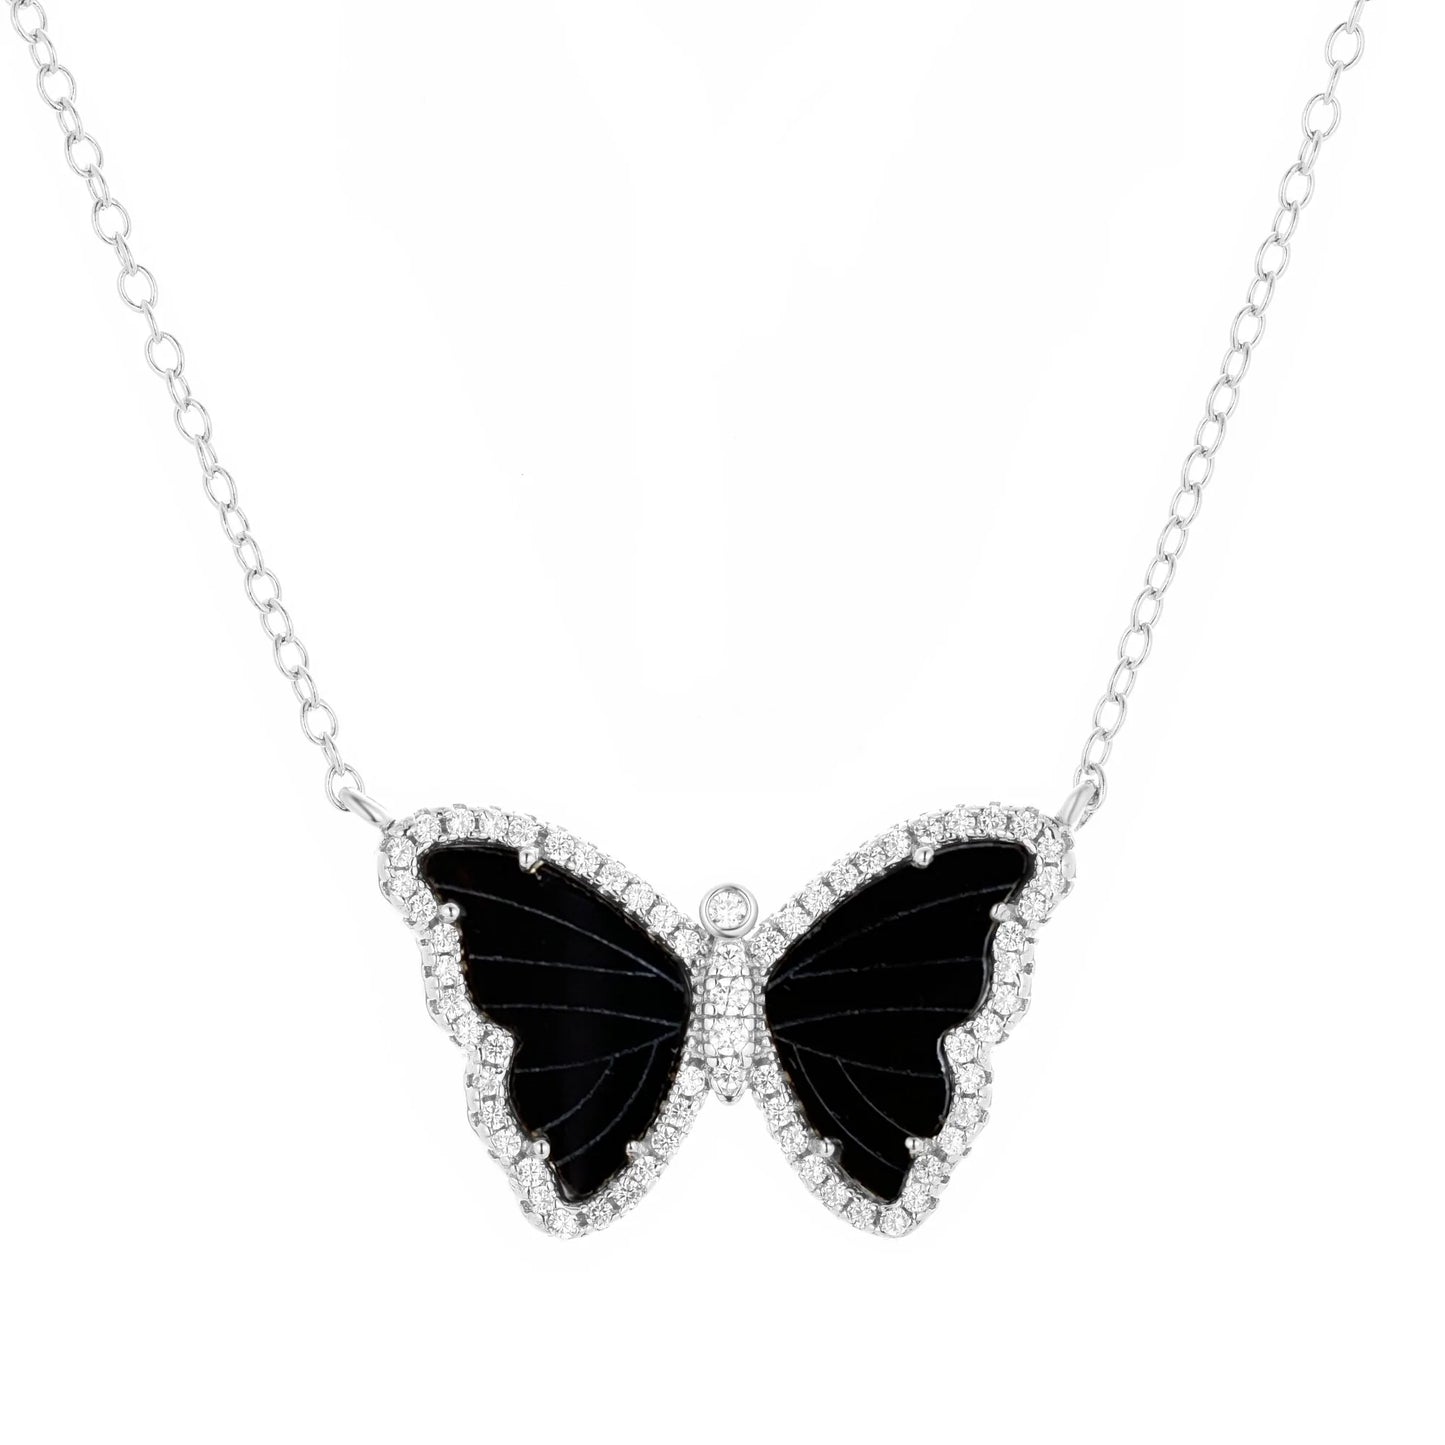 KAMARIA BLACK ONYX BUTTERFLY NECKLACE WITH CRYSTALS